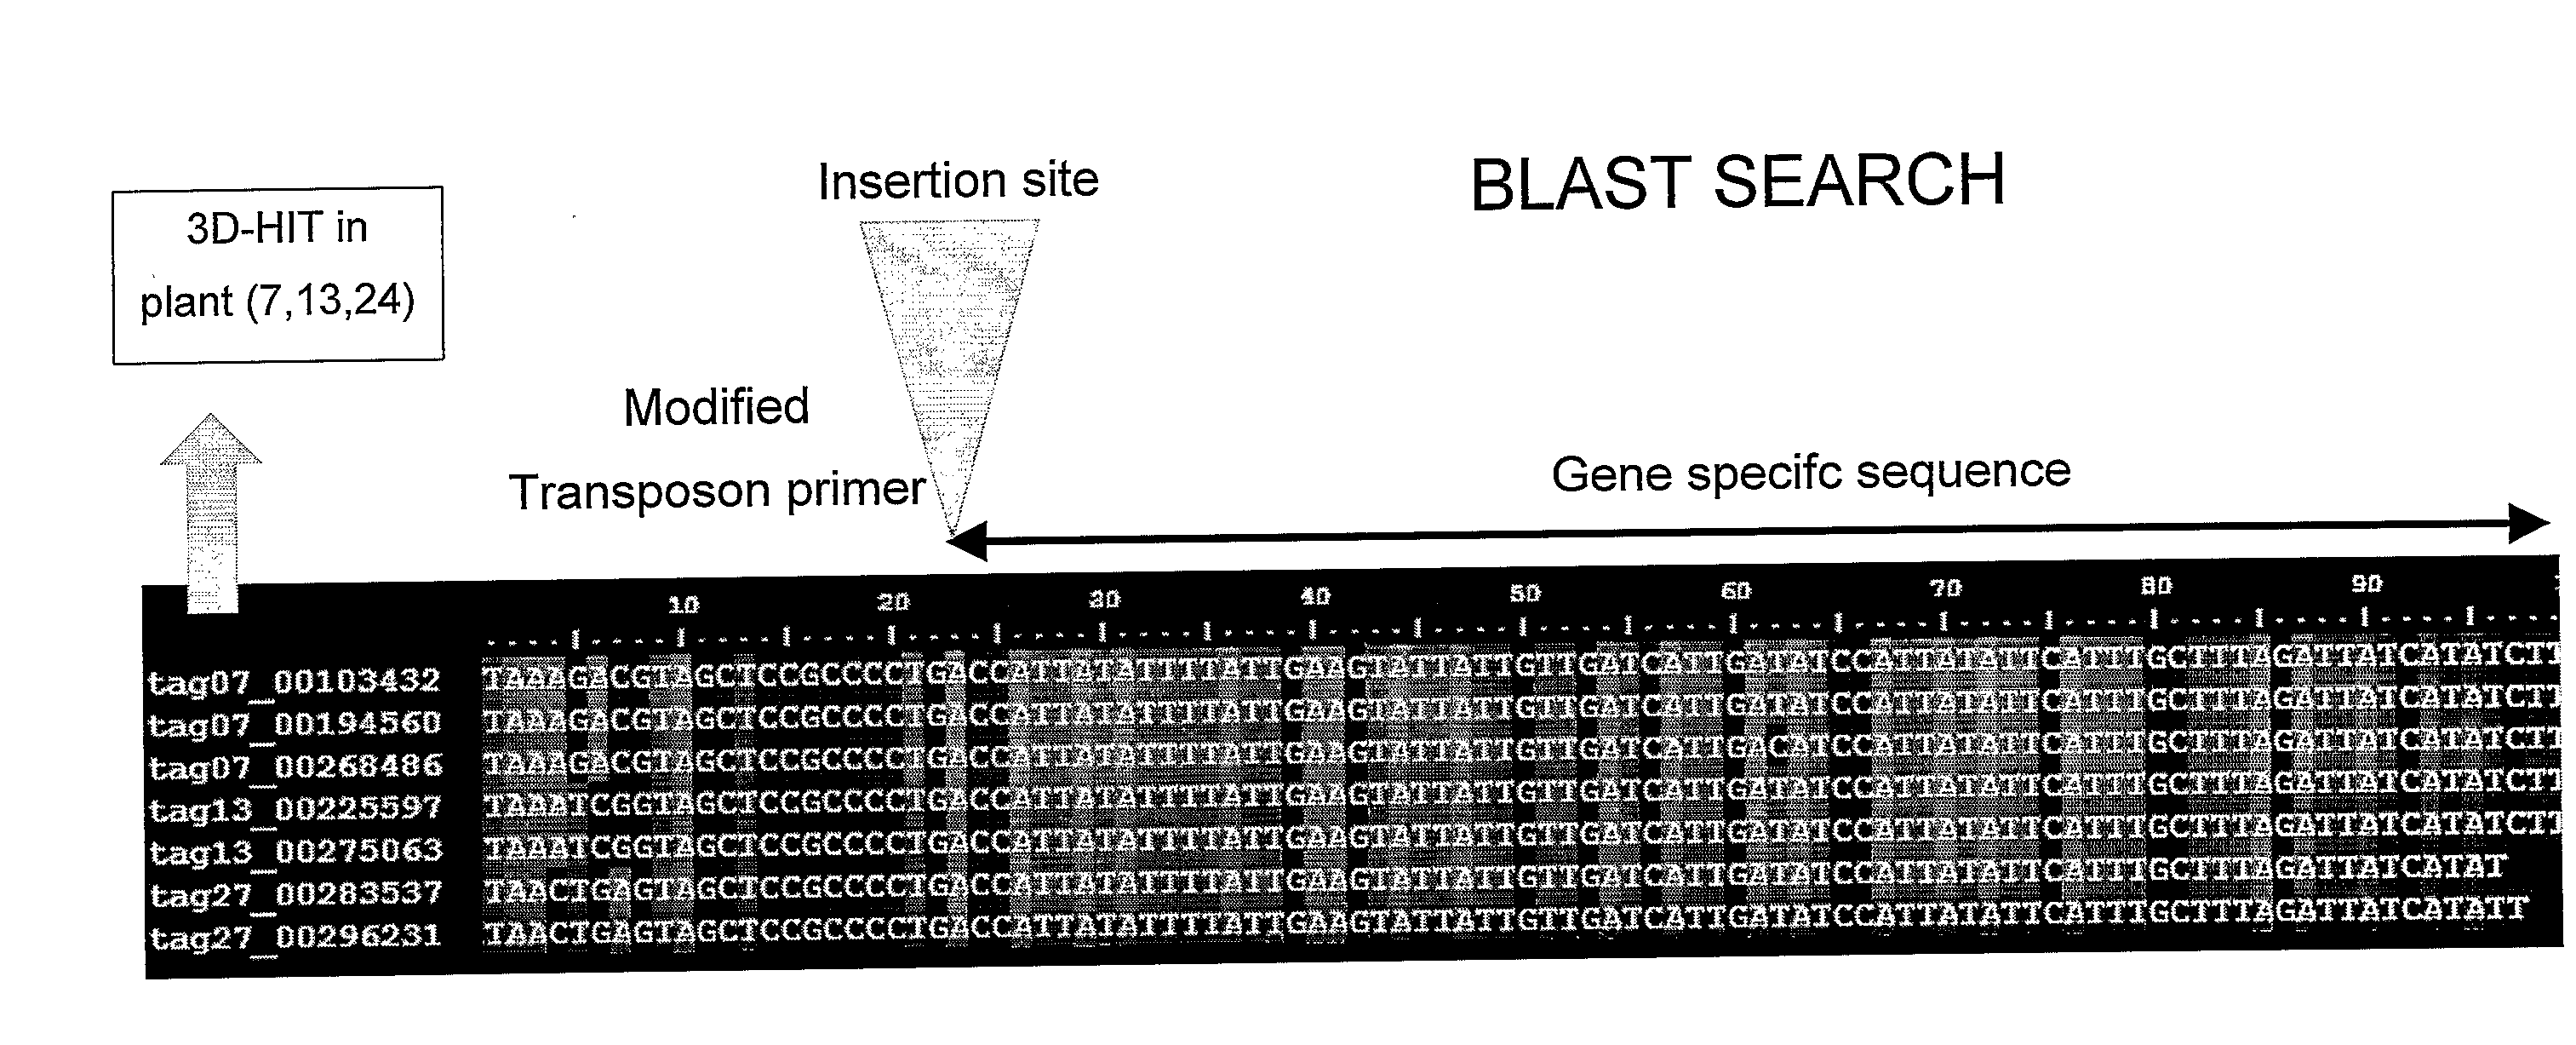 Method for the High Throughput Screening of Transposon Tagging Populations and Massive Parallel Sequence Identification of Insertion Sites